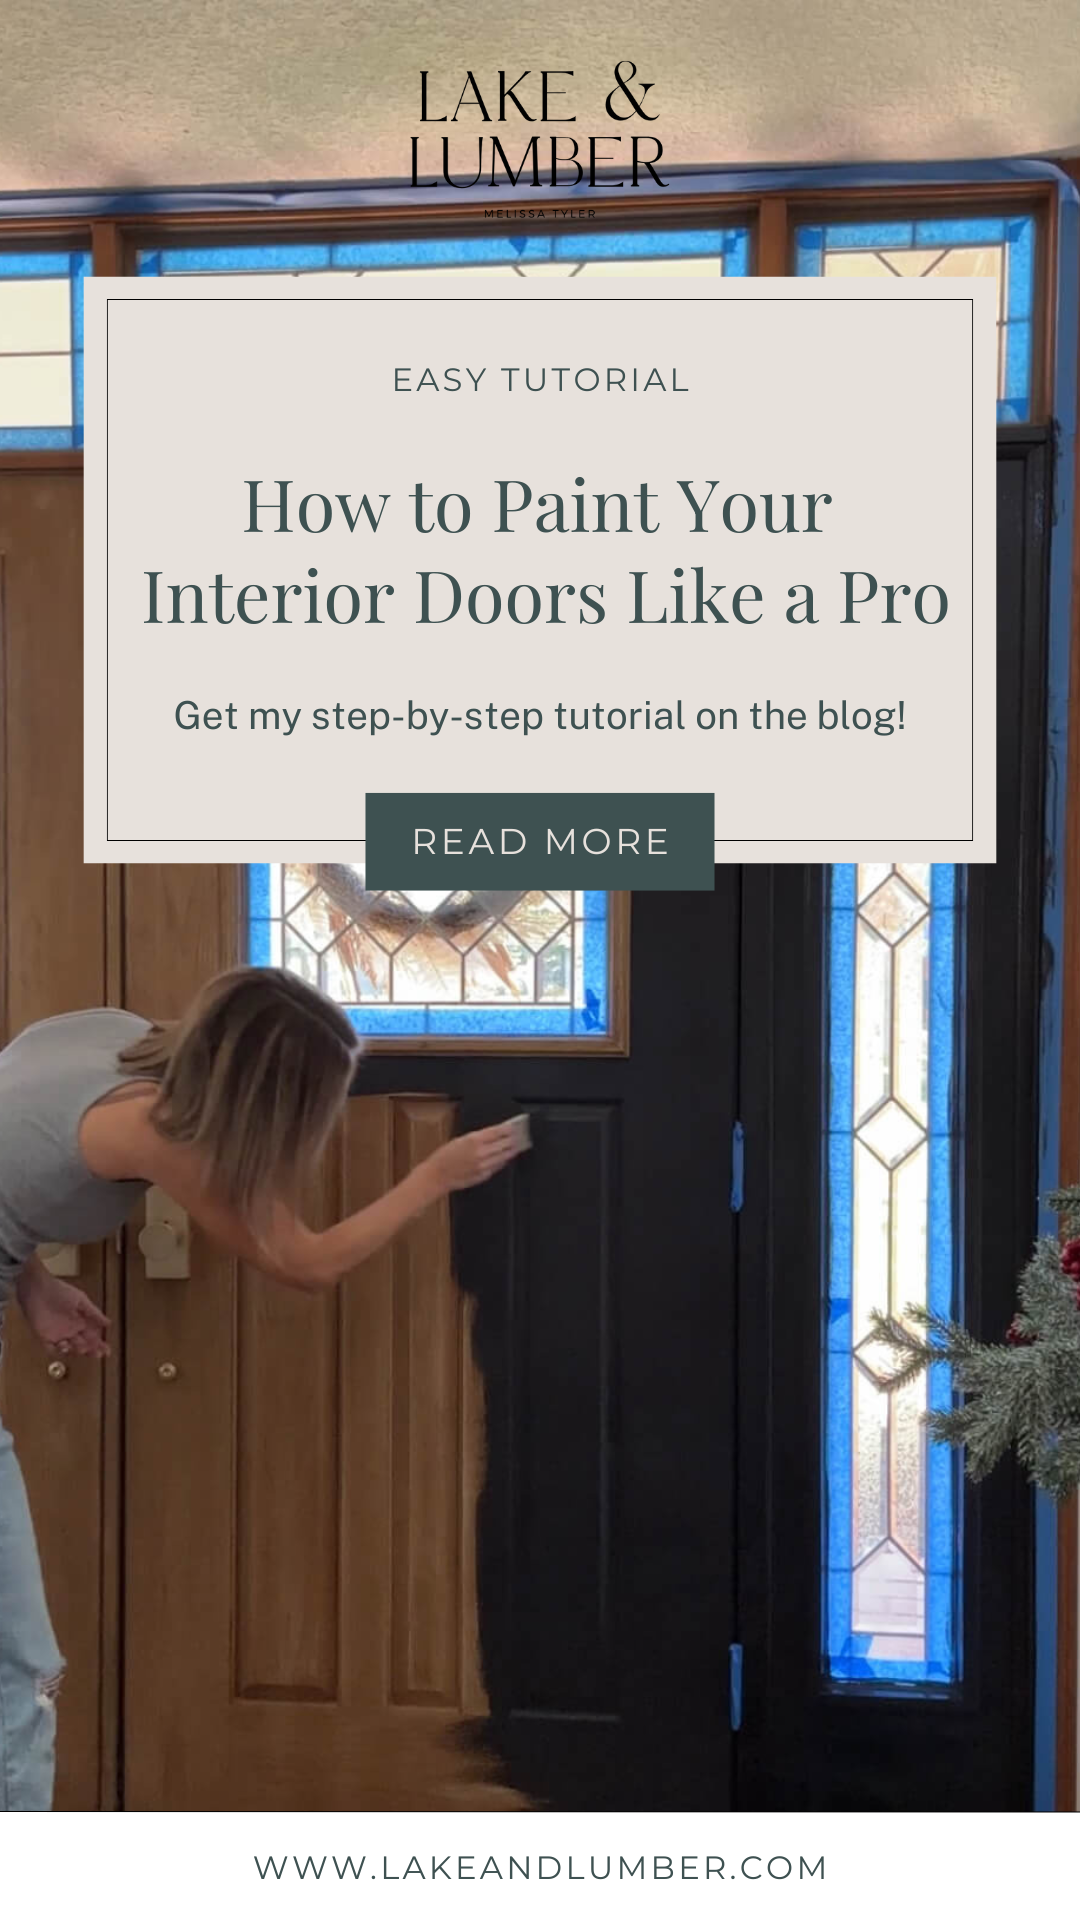 Pinterest Pin about painting your interior doors 